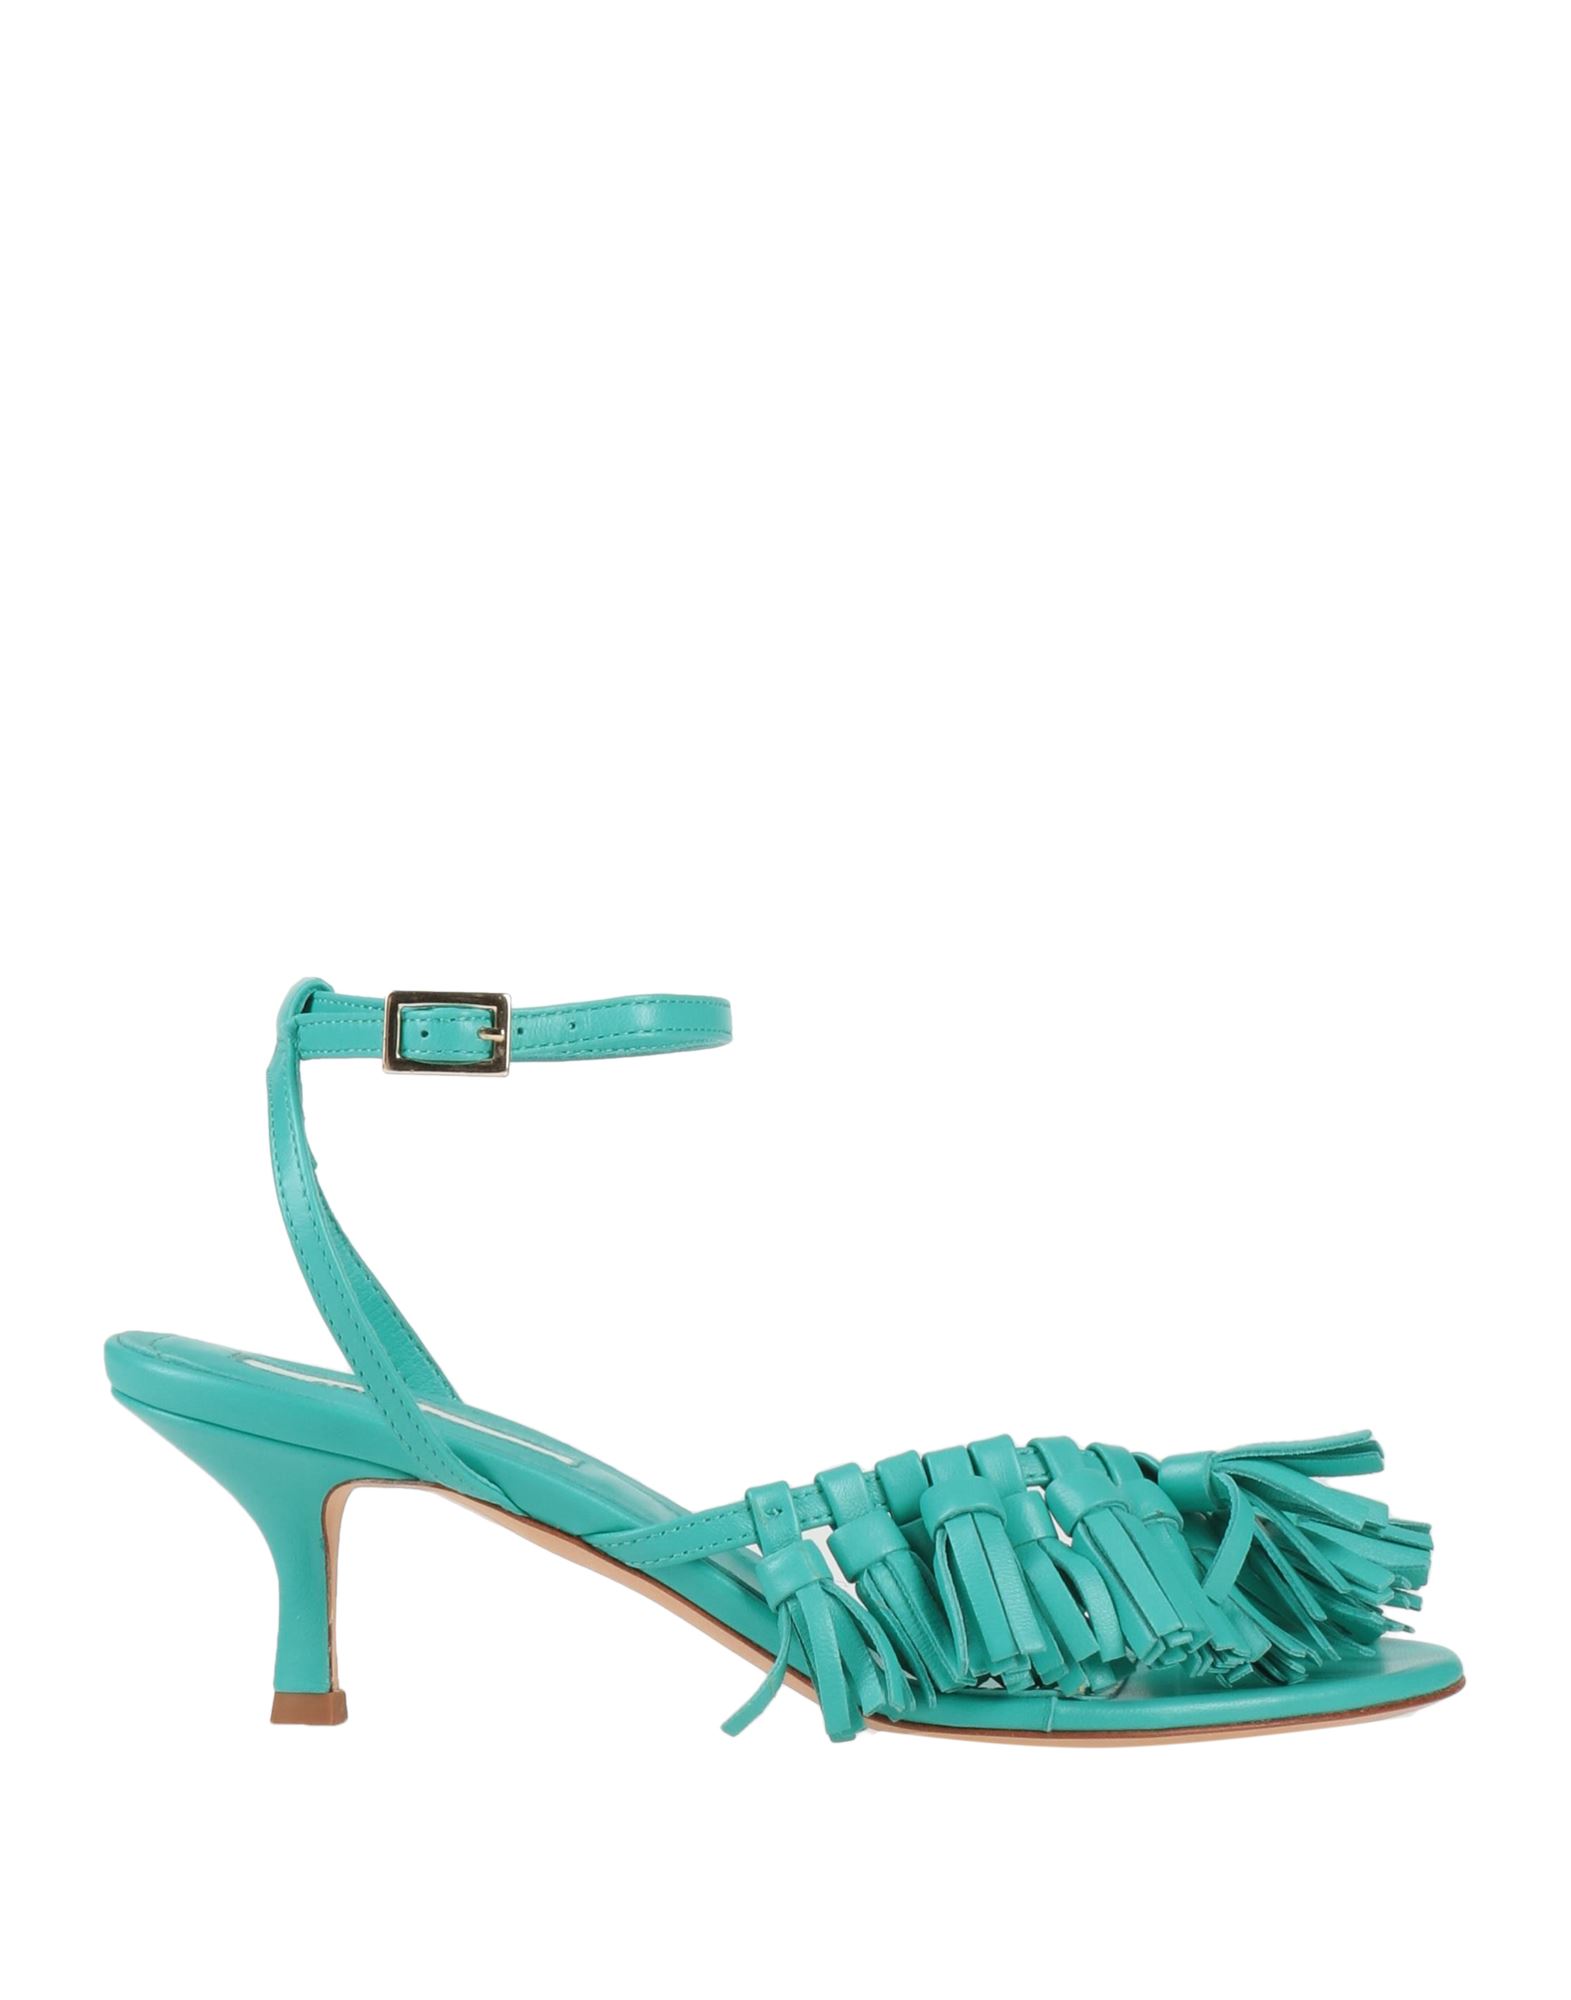 Circus Hotel Toe Strap Sandals In Blue